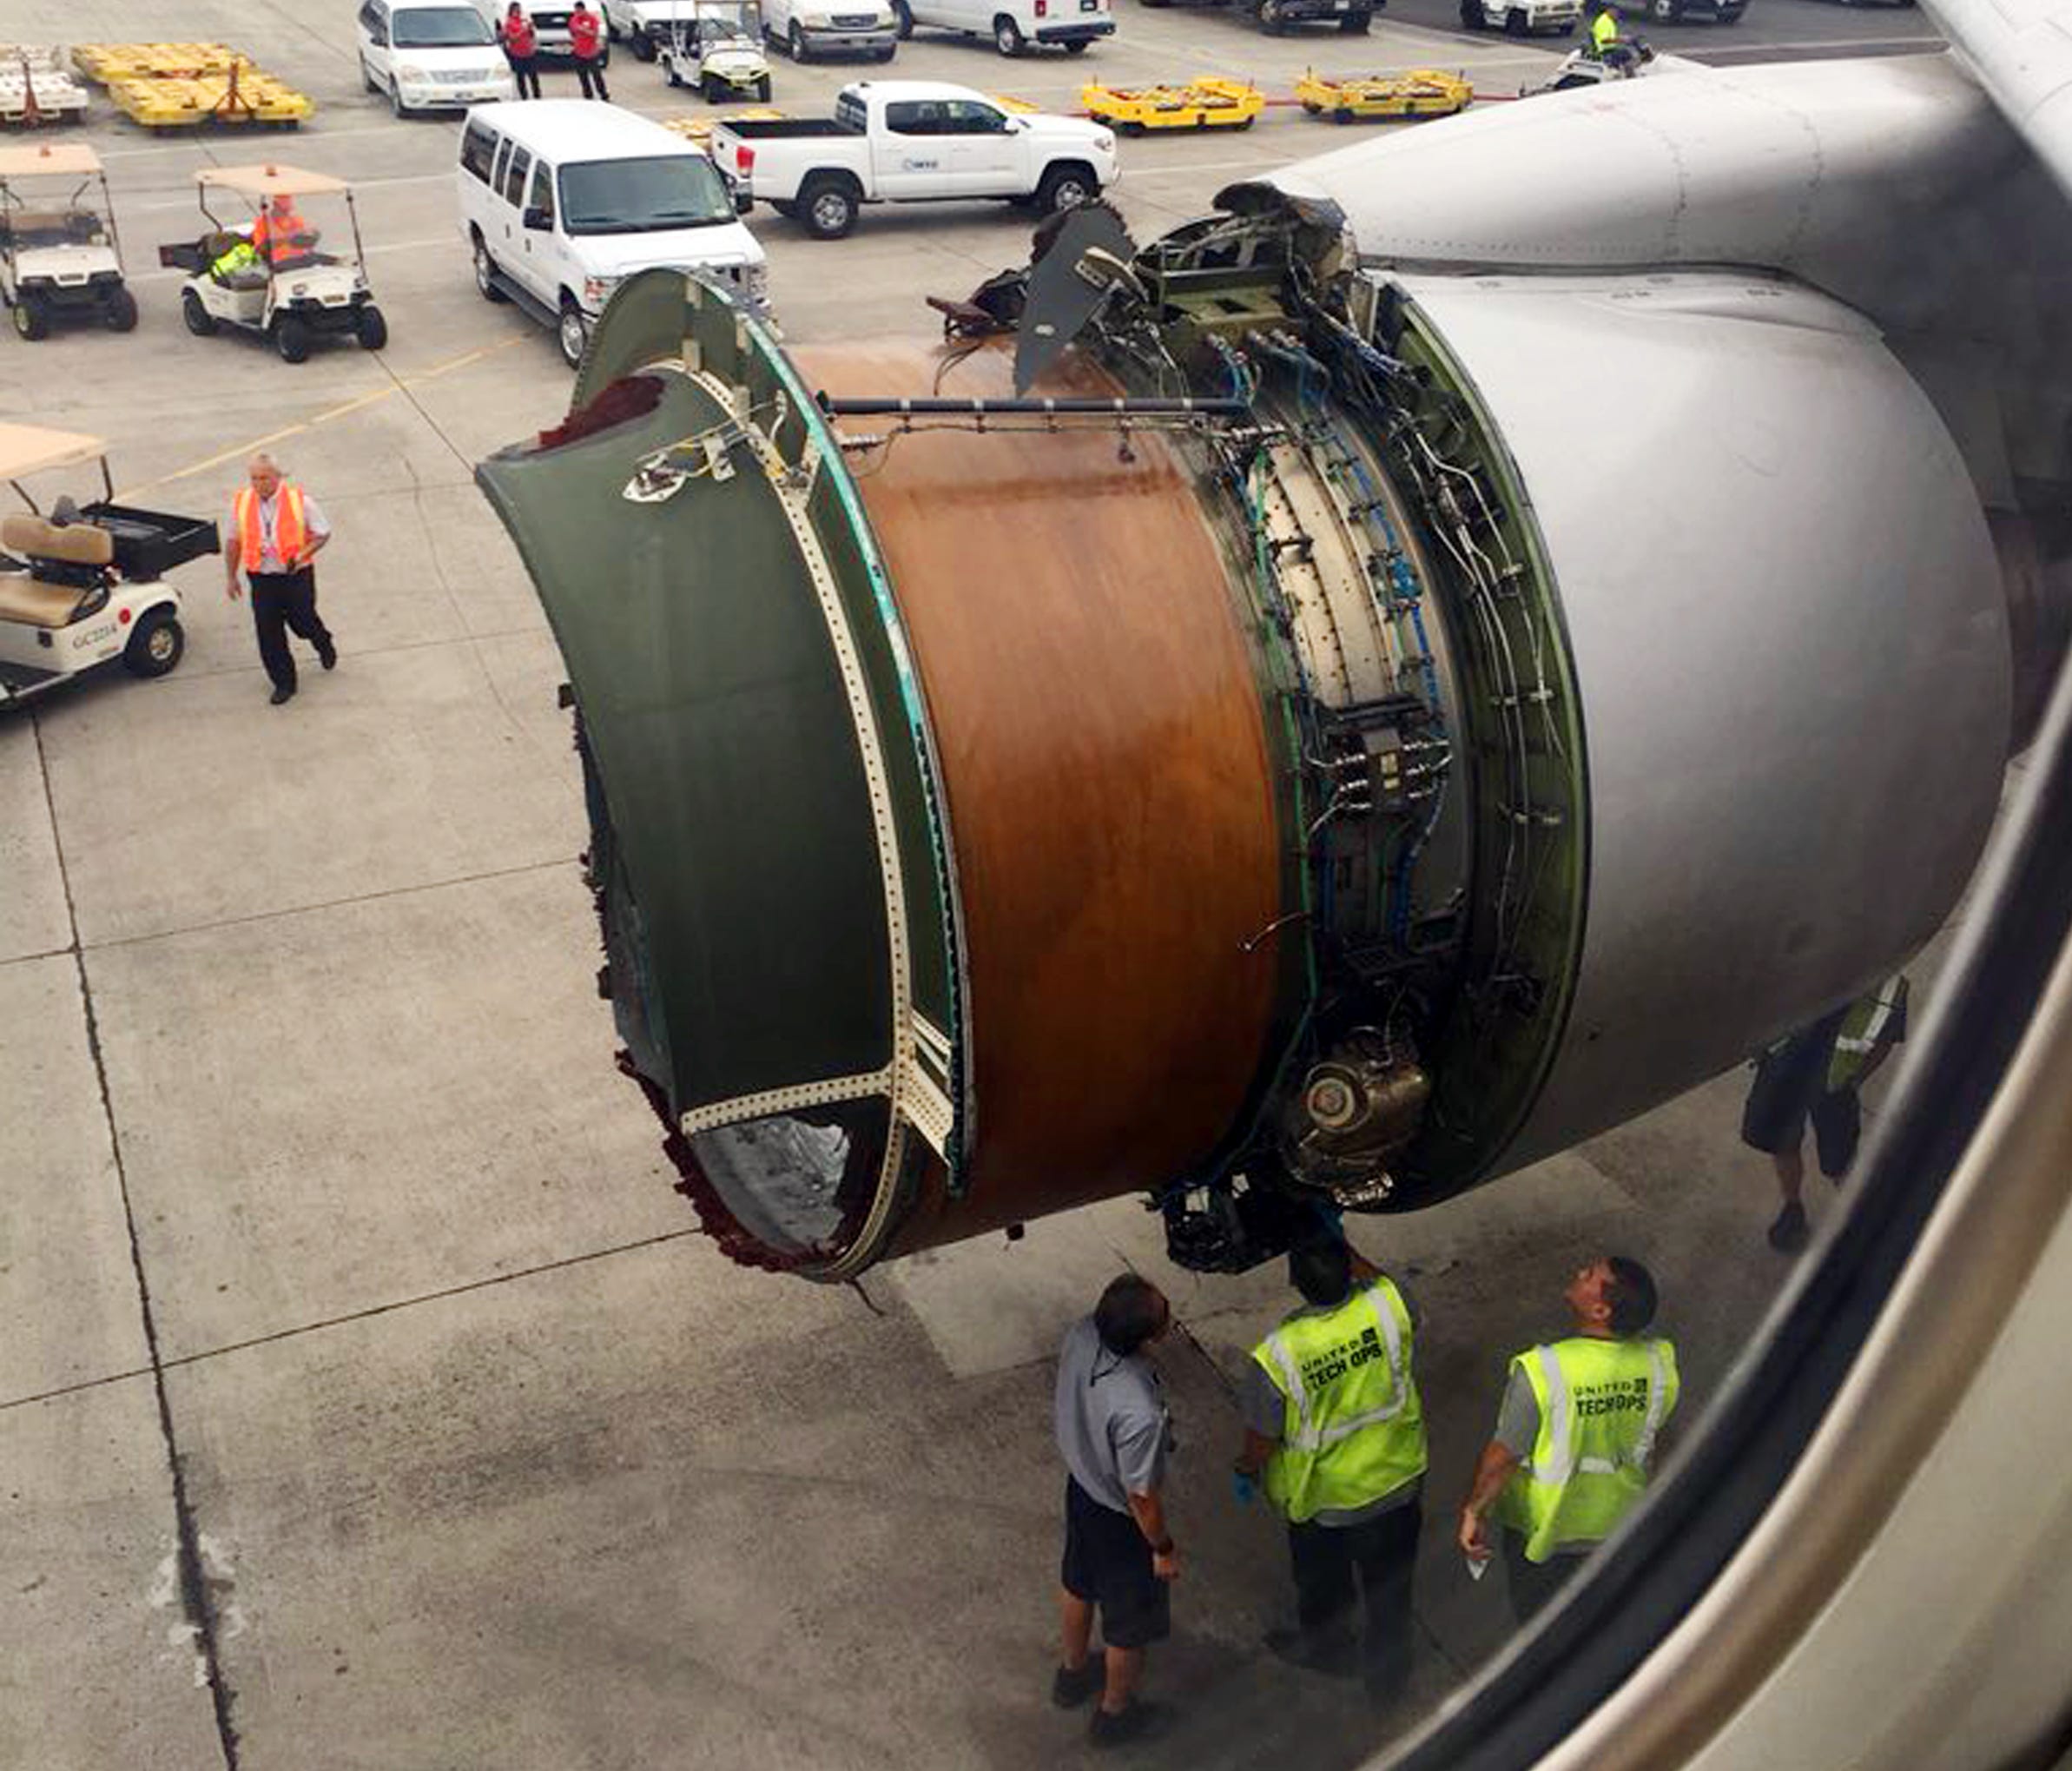 This photo provided by passenger Haley Ebert shows damage to an engine of a Boeing 777 after parts came off the jetliner during its flight from San Francisco to Honolulu on Tuesday, Feb. 13, 2018. The plane landed safely as emergency responders waite